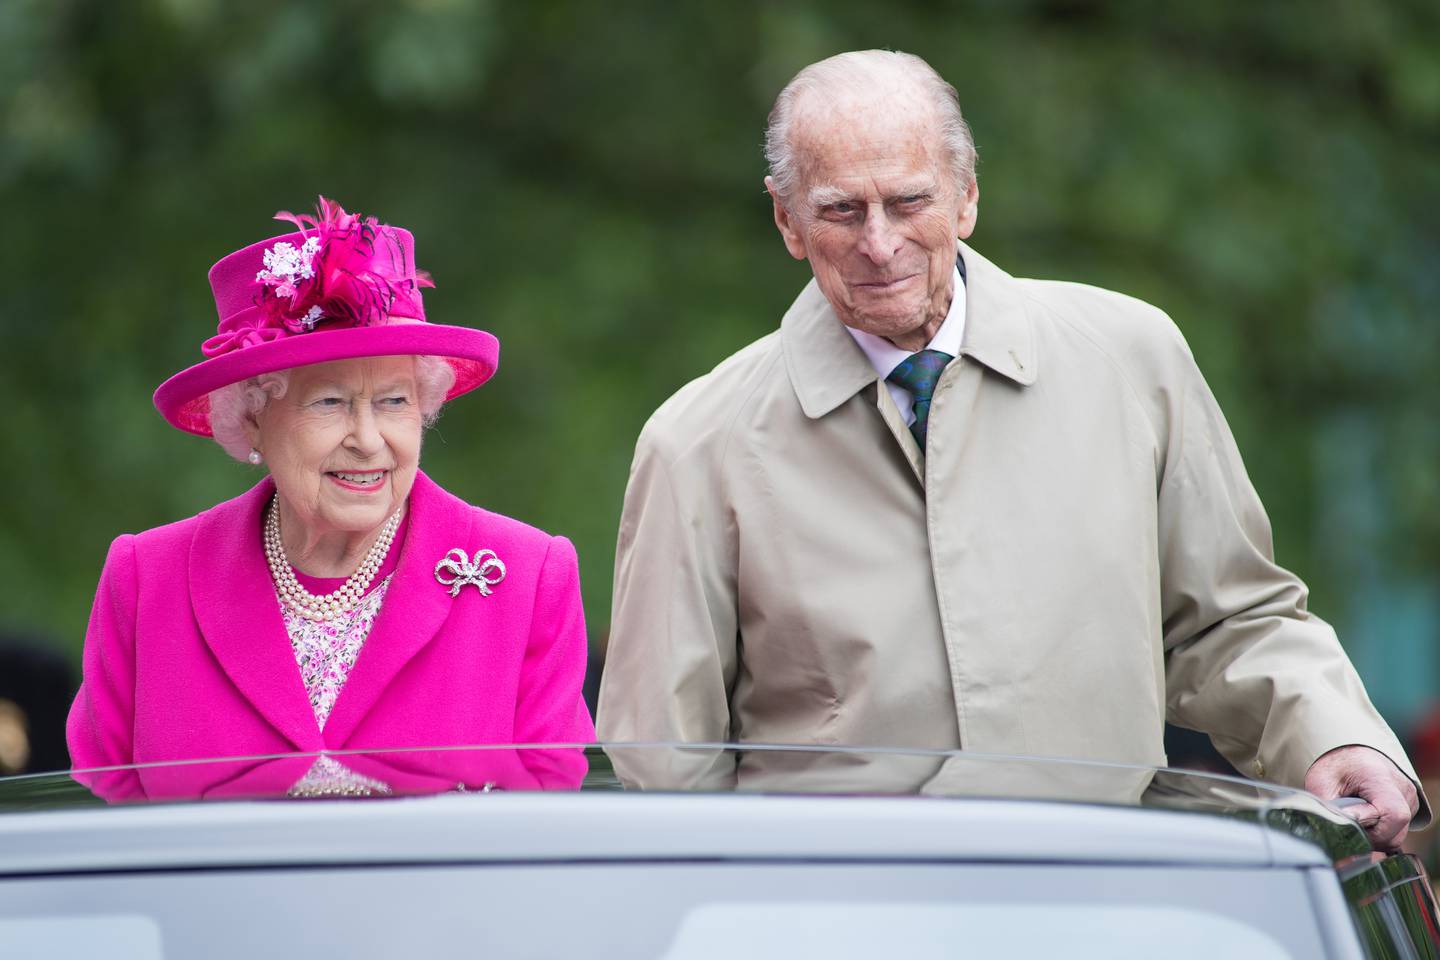 The Queen and Prince Philip at her 90th birthday celebrations in 2016. Getty